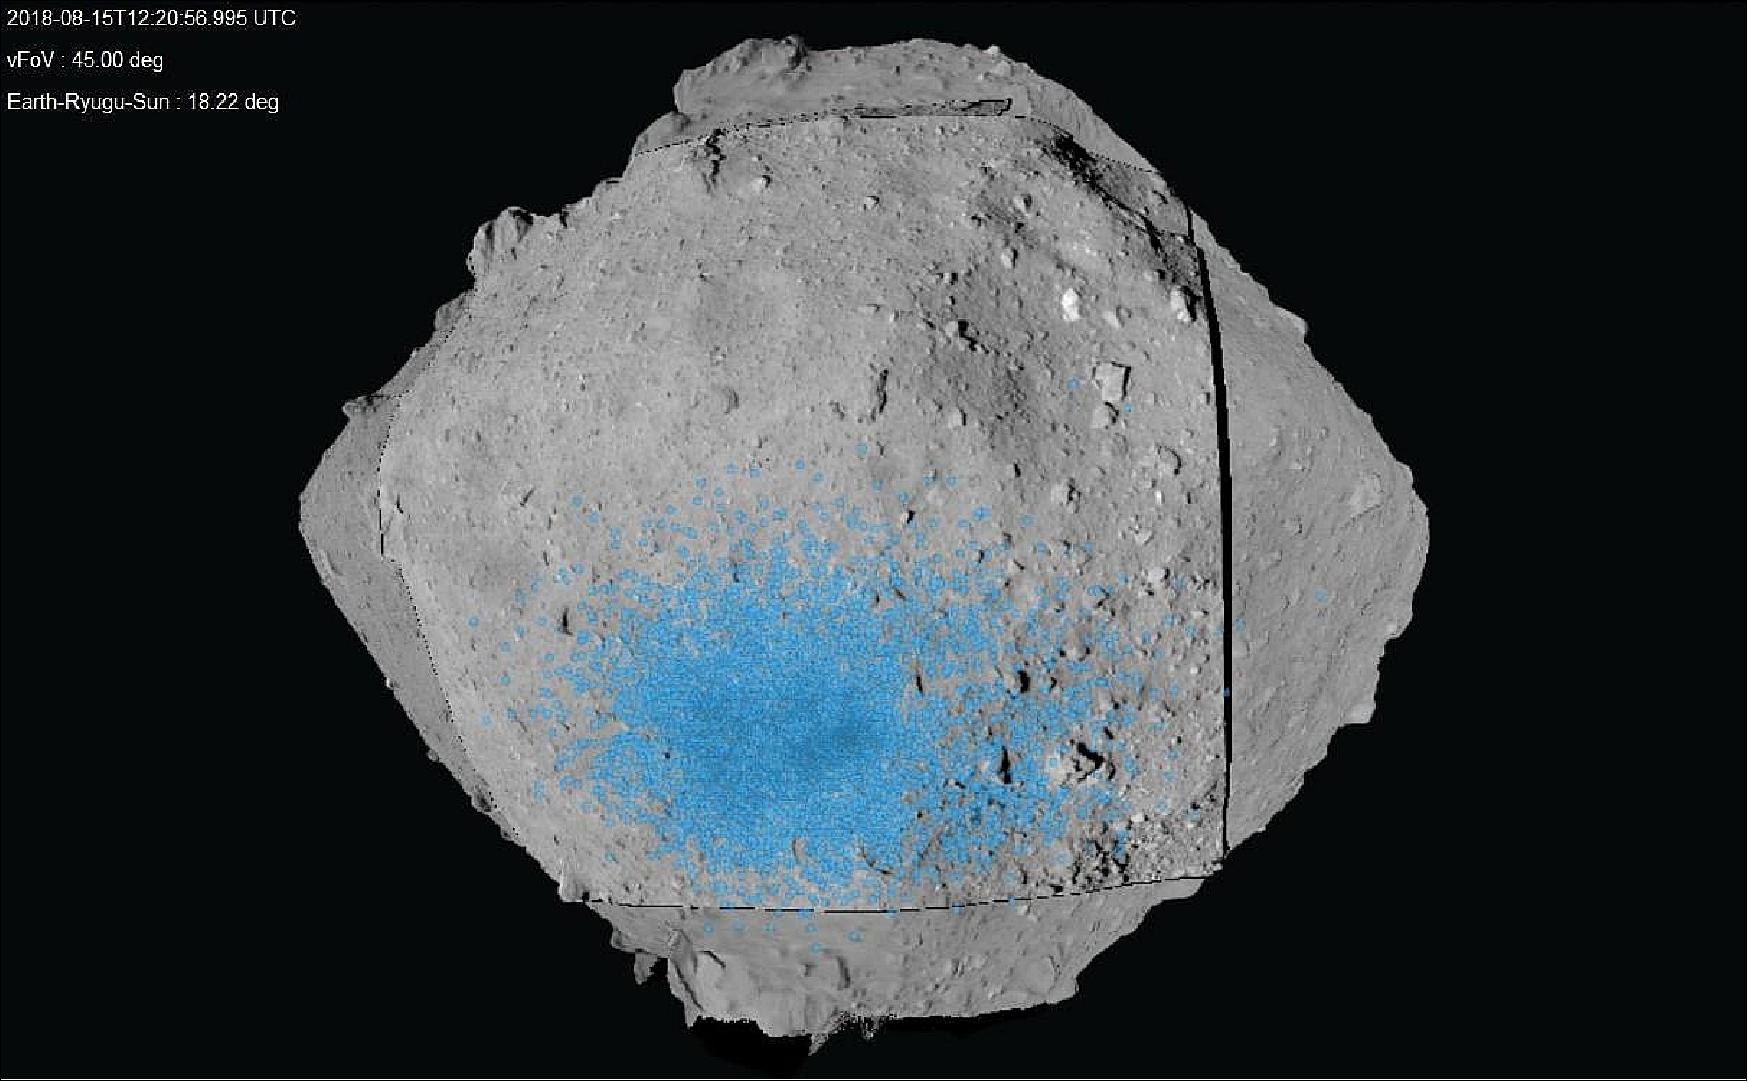 Figure 86: MASCOT landing site candidate region (light blue area). Since MASCOT is expected to bounce several times after first touching down, a reasonably wide region was selected (image credit: JAXA, University of Tokyo, Kochi University, Rikkyo University, Nagoya University, Chiba Institute of Technology, Meiji University, University of Aizu, AIST, CNES, DLR)